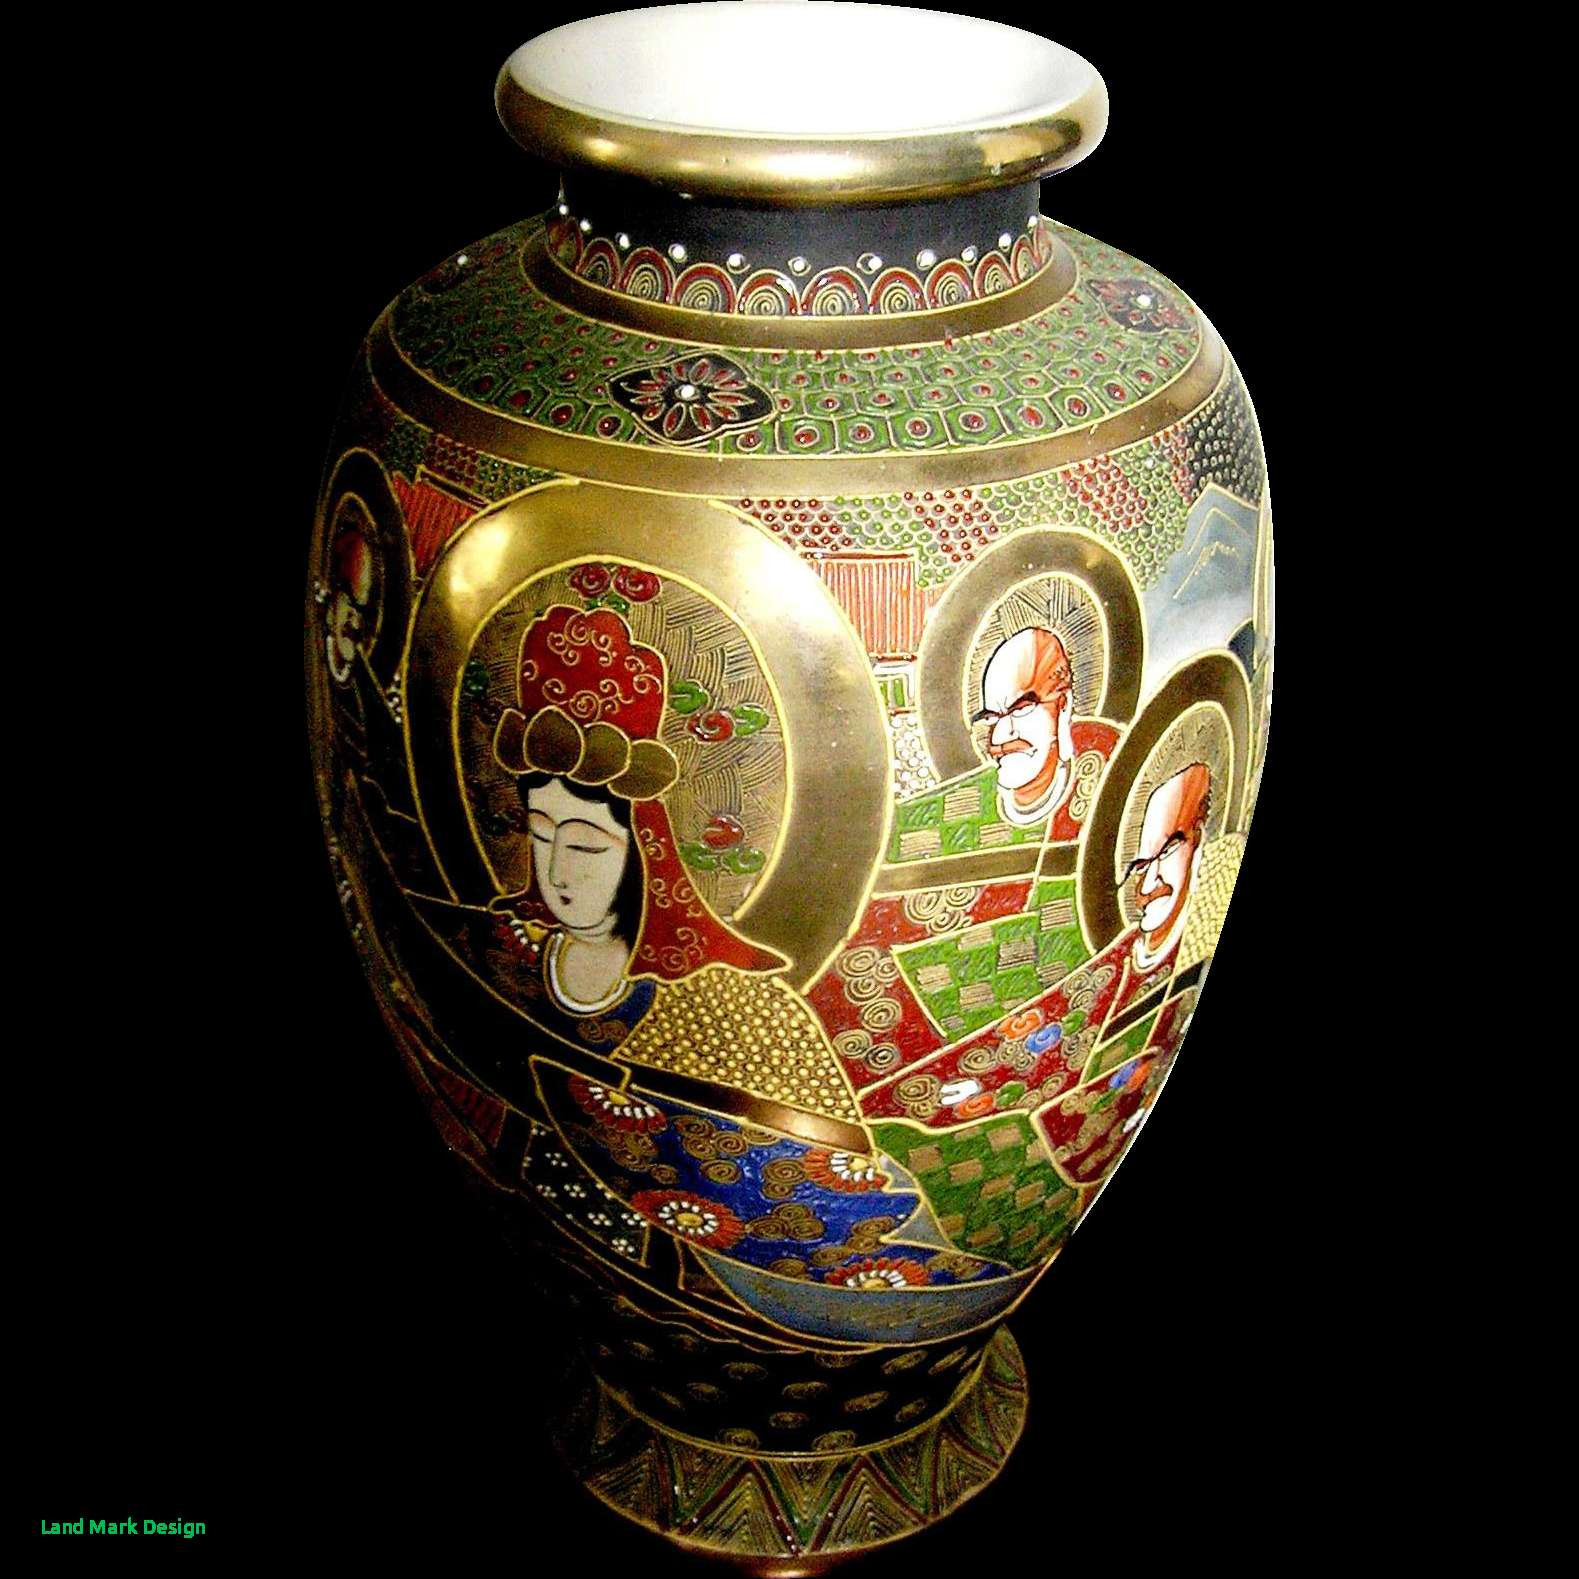 16 Recommended Satsuma China Vase 2024 free download satsuma china vase of huge vases design home design throughout 001224 1lh vases satsuma vase prices huge vintage 19 inches tall gold halos around ahrats moriage